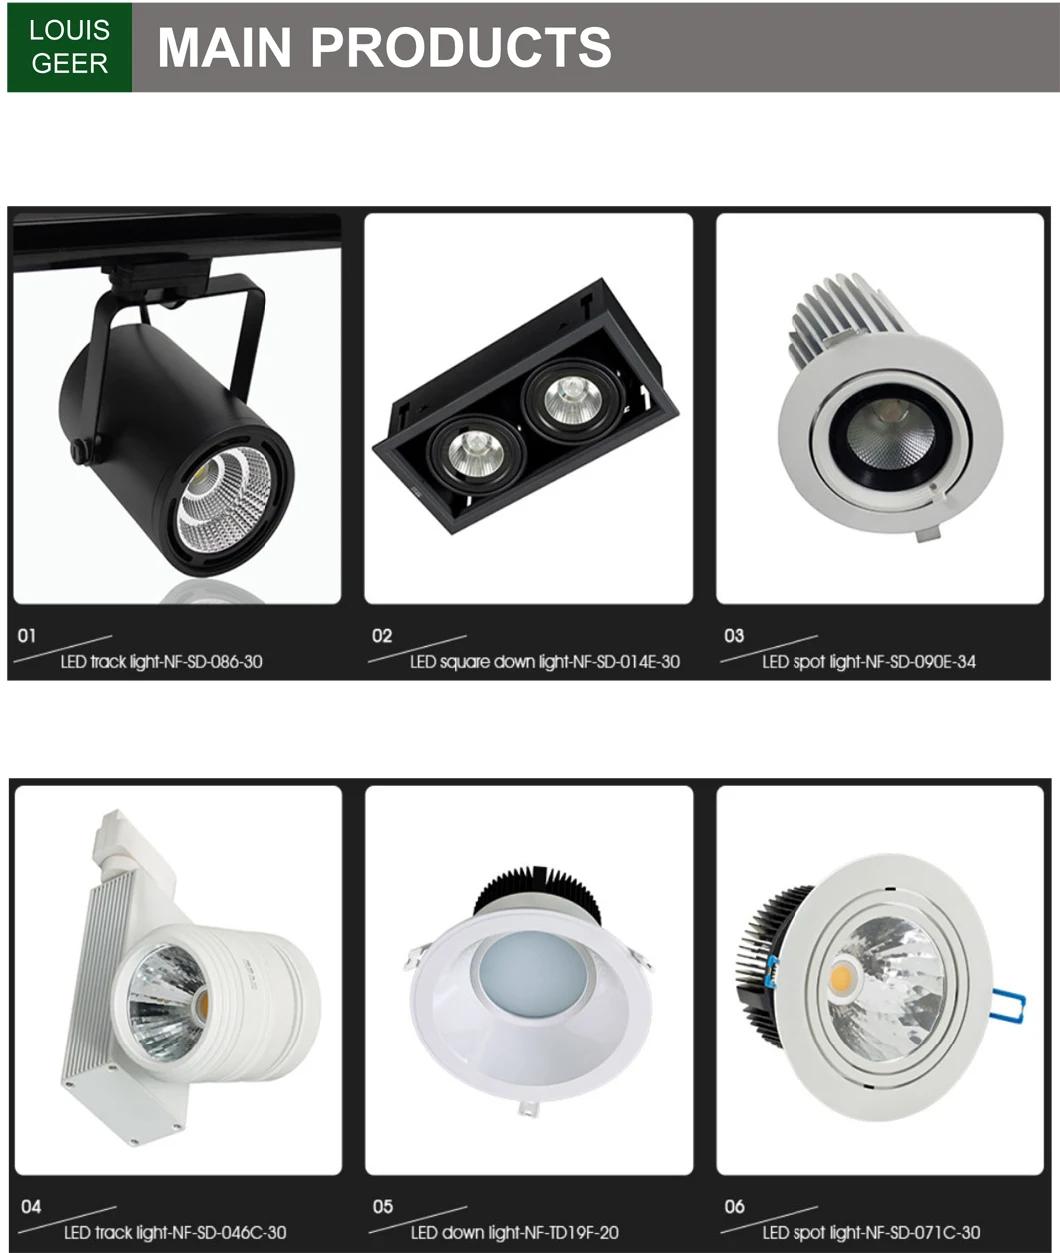 Hot Sell LED Indoor Light Die-Casting Aluminum Housing Embedded LED Ceiling Downlight for Office Club Hotel Hospital